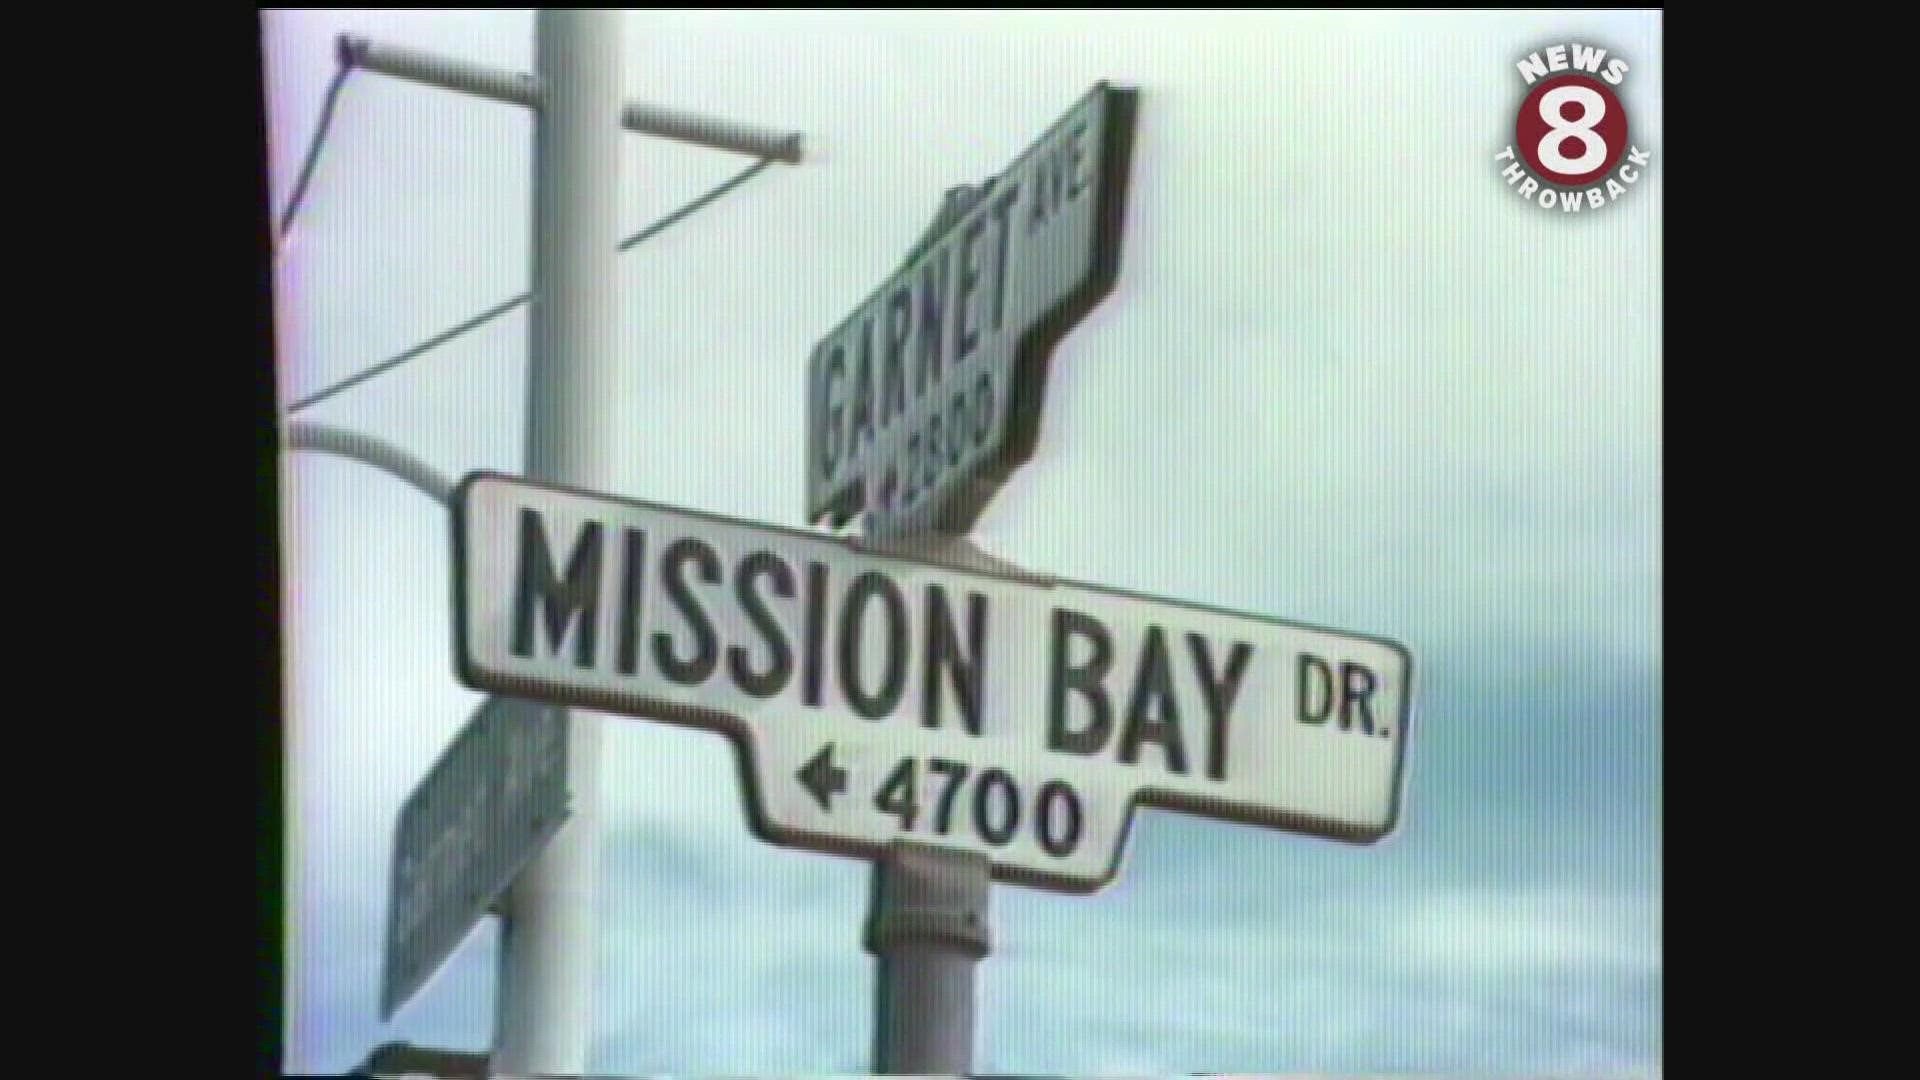 Mission Bay Drive and Garnet Avenue intersection considered most dangerous in 1979